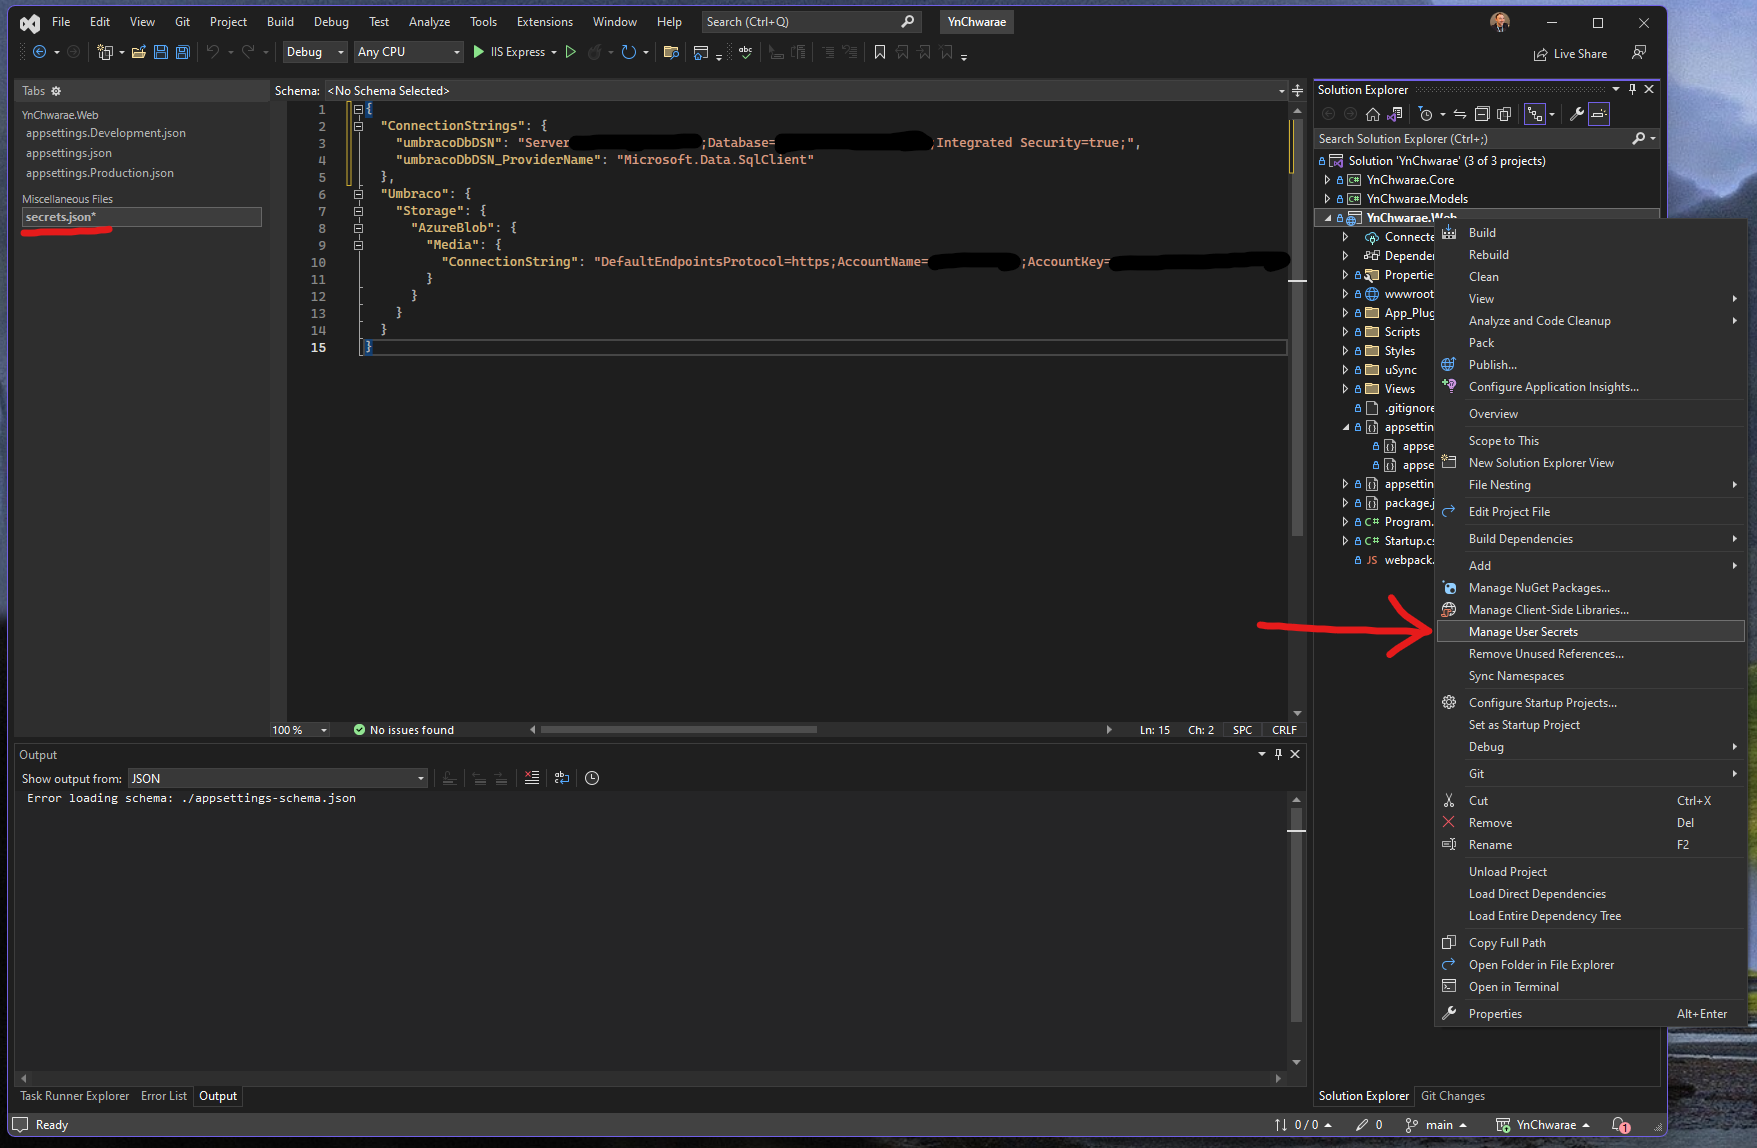 Screenshot of Visual Studio with the right-click context menu open on the project highlighting the Manage User Secrets option